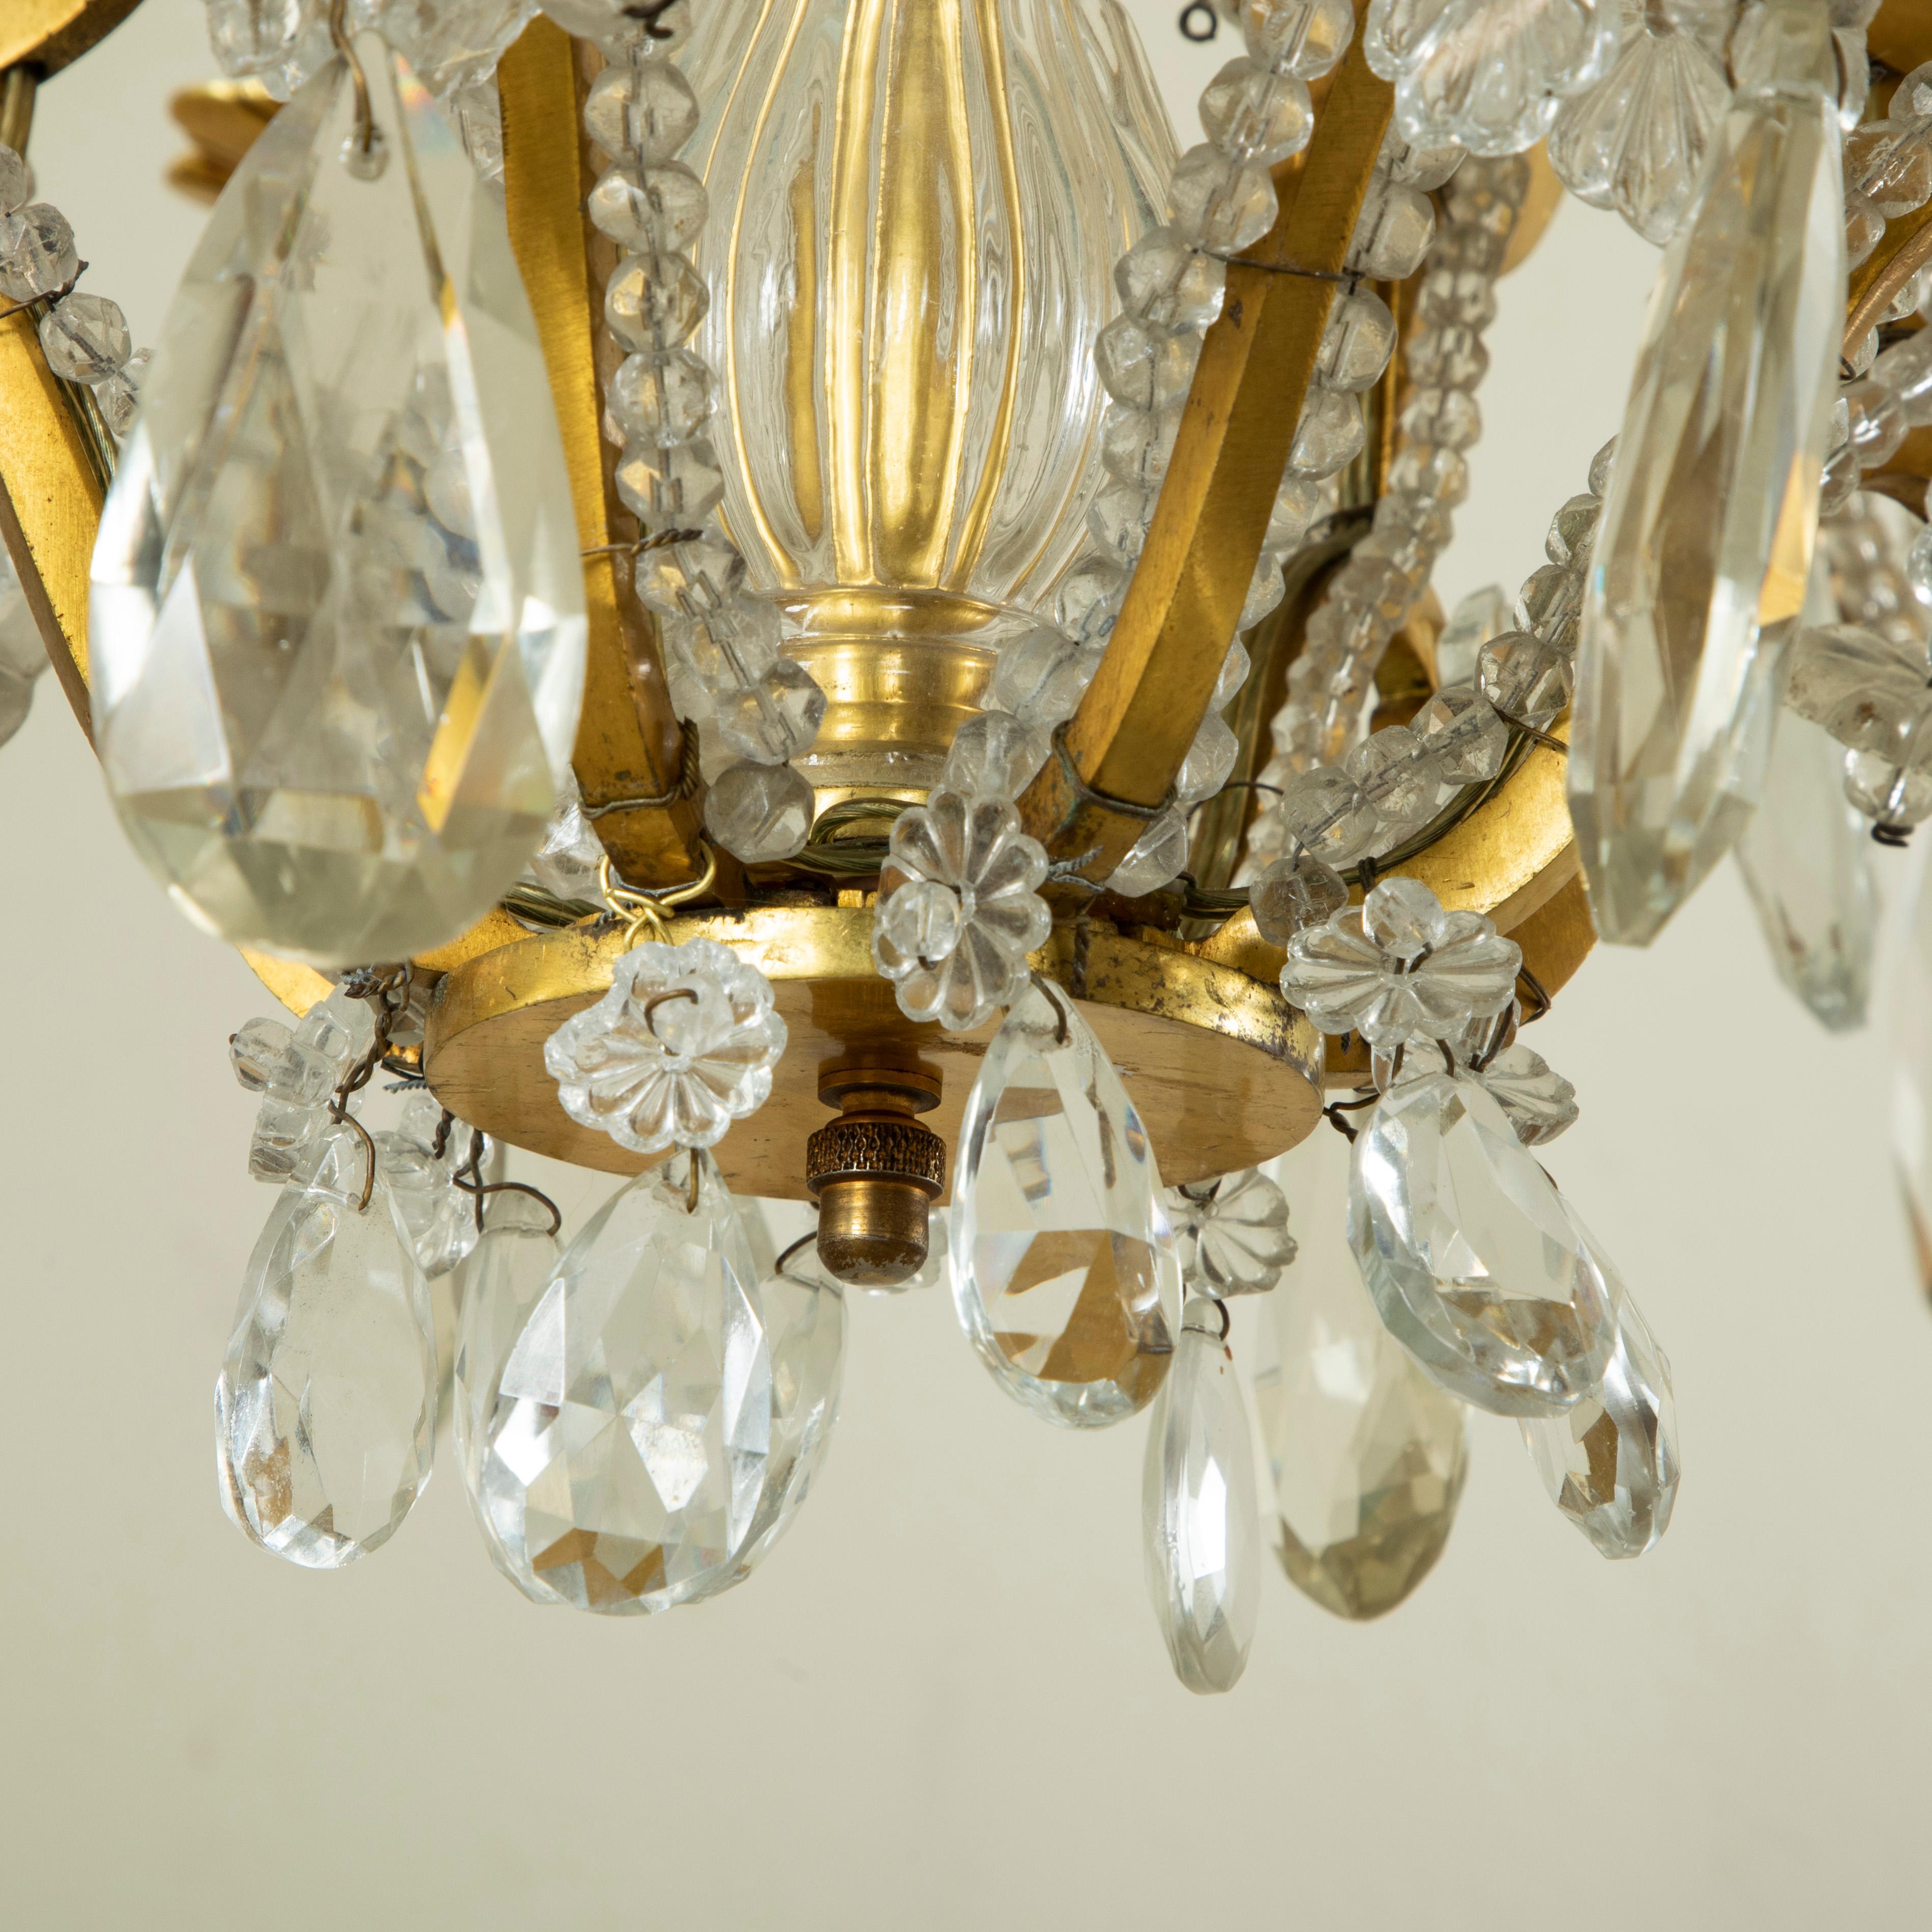 Mid-20th Century French Maison Bagues Bronze and Crystal Chandelier with Angels For Sale 2